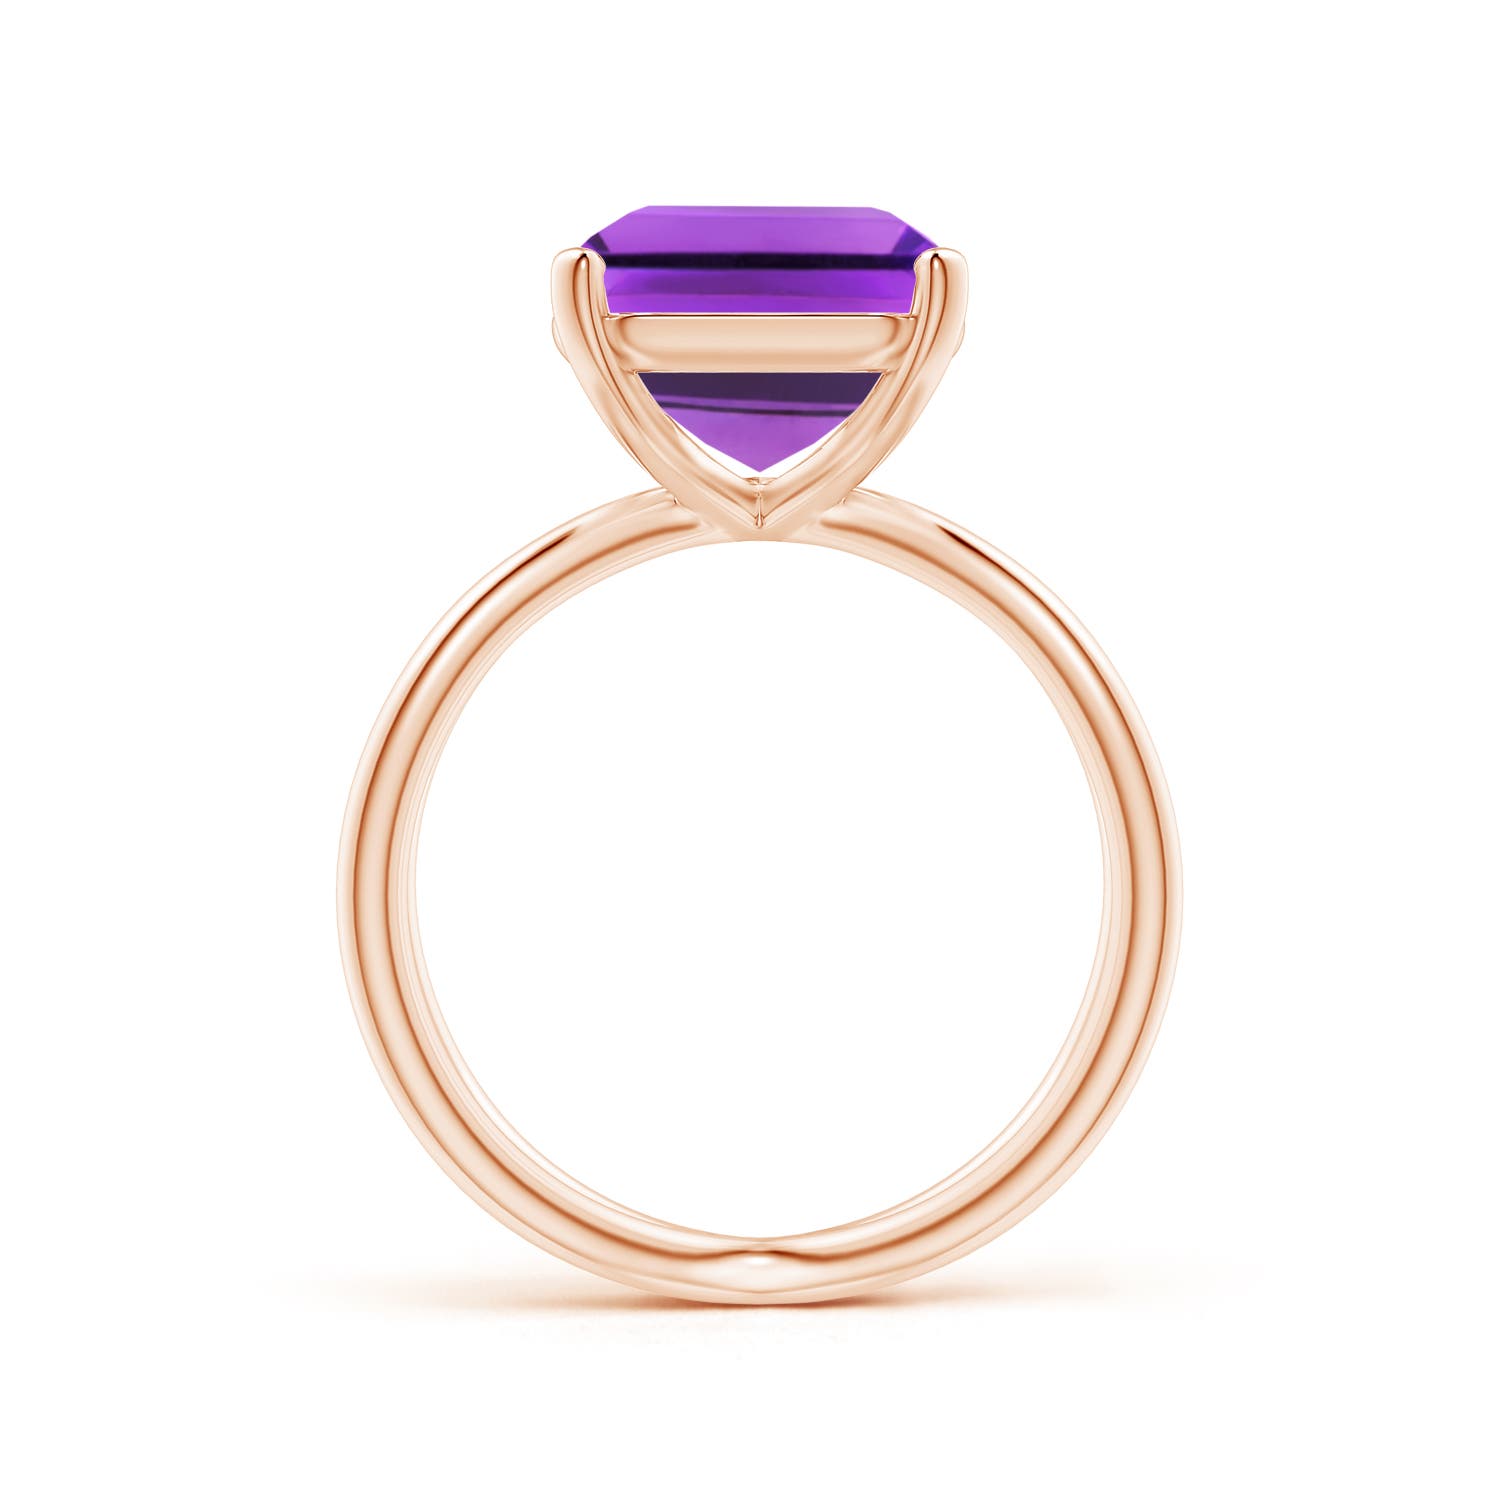 AAA - Amethyst / 5.3 CT / 14 KT Rose Gold